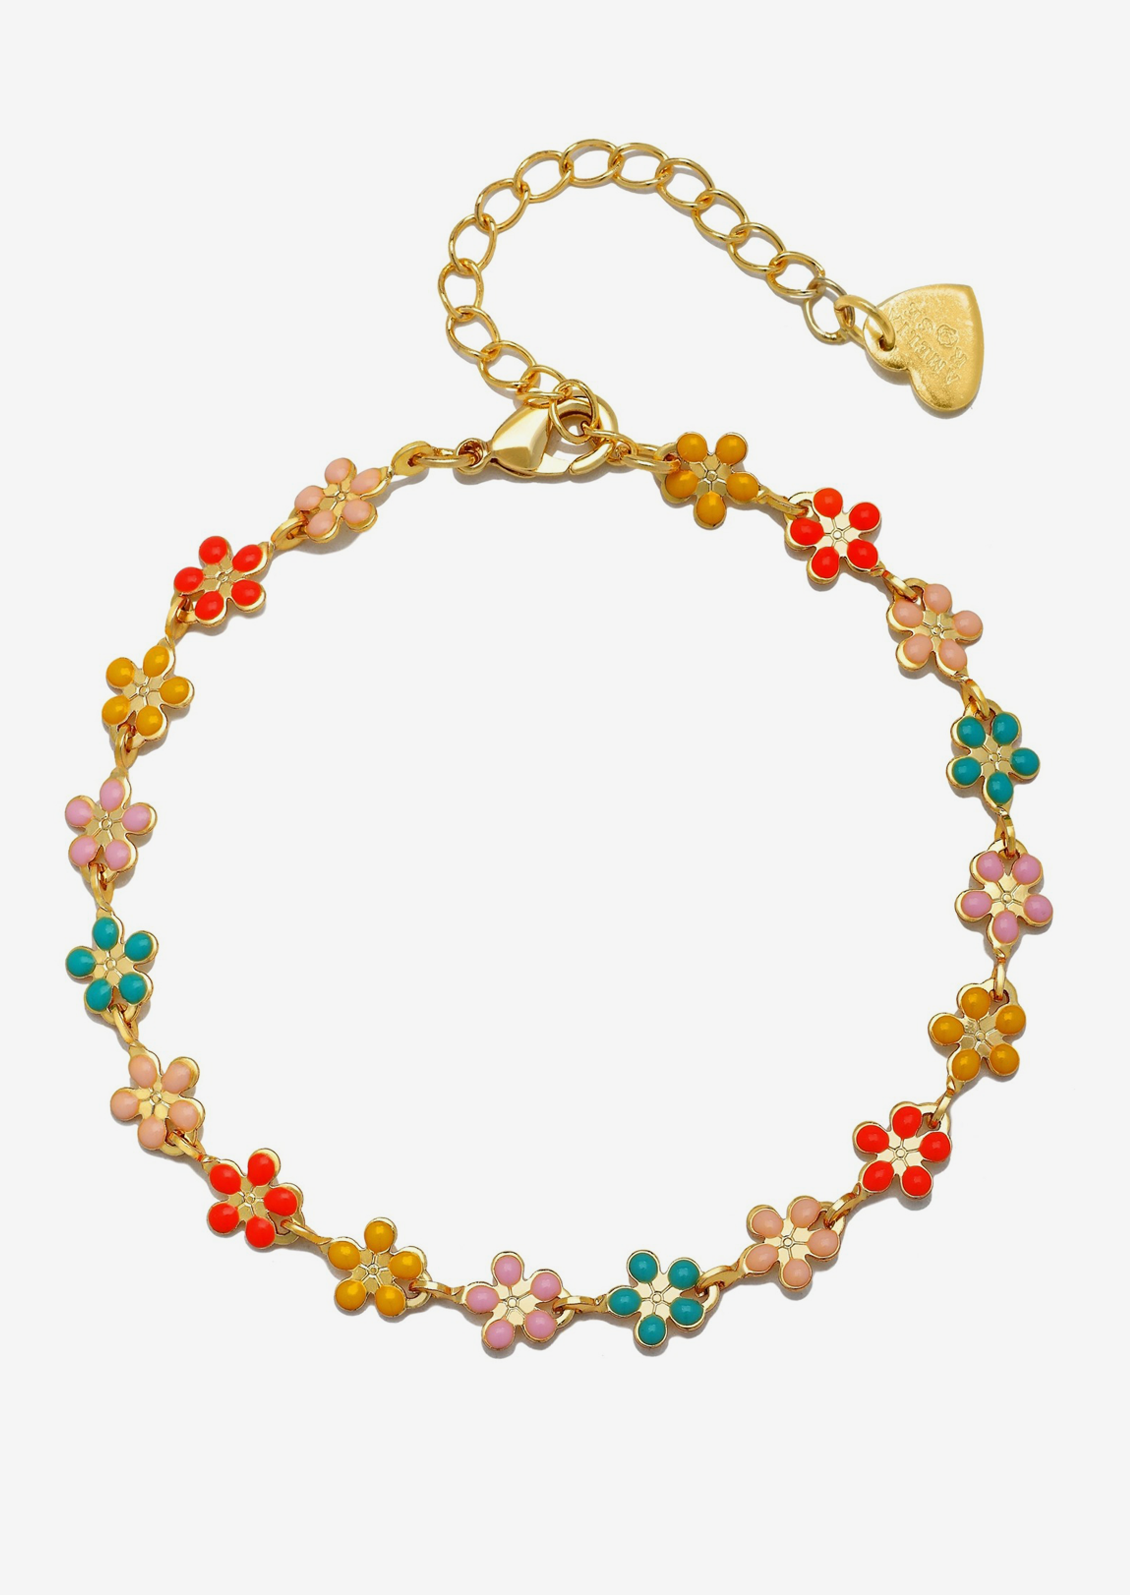 A gold bracelet with allover small enameled flowers in multicolor.